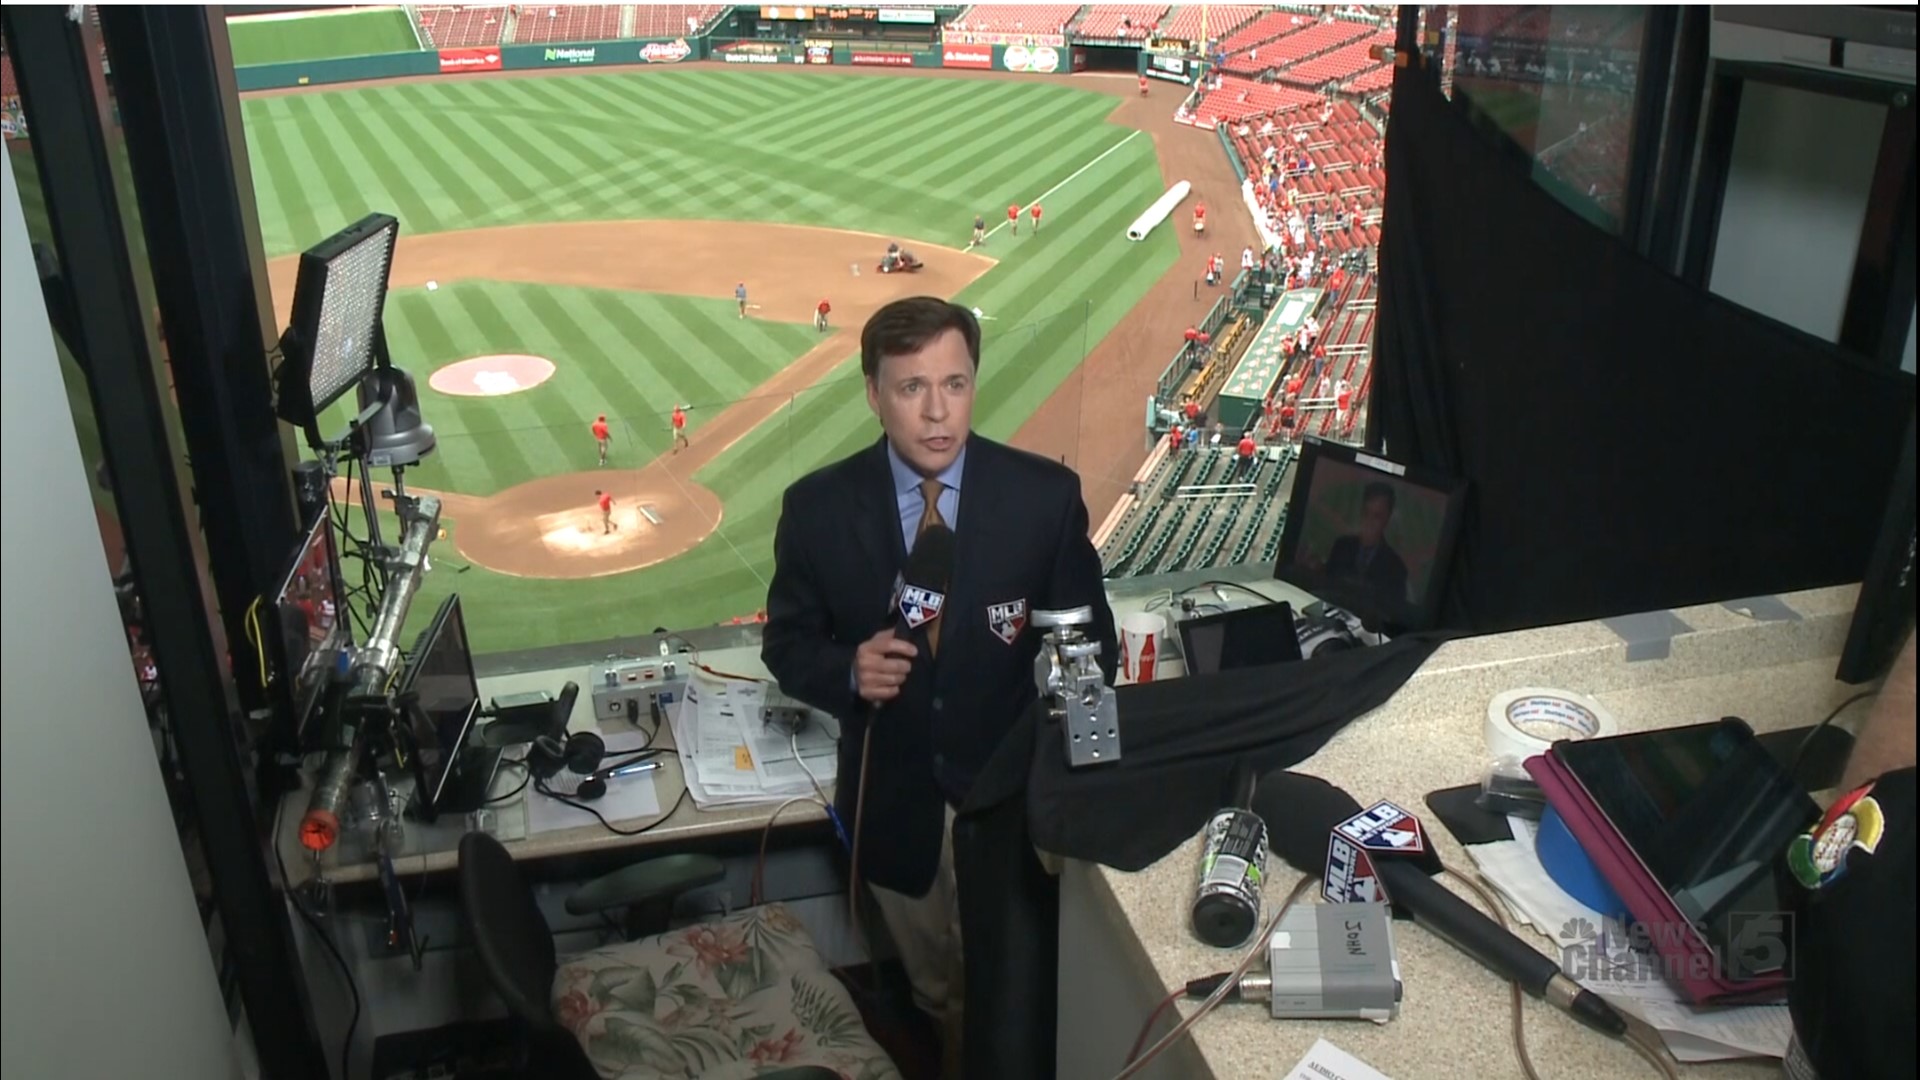 Bob Costas said he thinks it is important to face the reality of sports when broadcasting it. He had his own experience with the NFL and concussions at NBC.